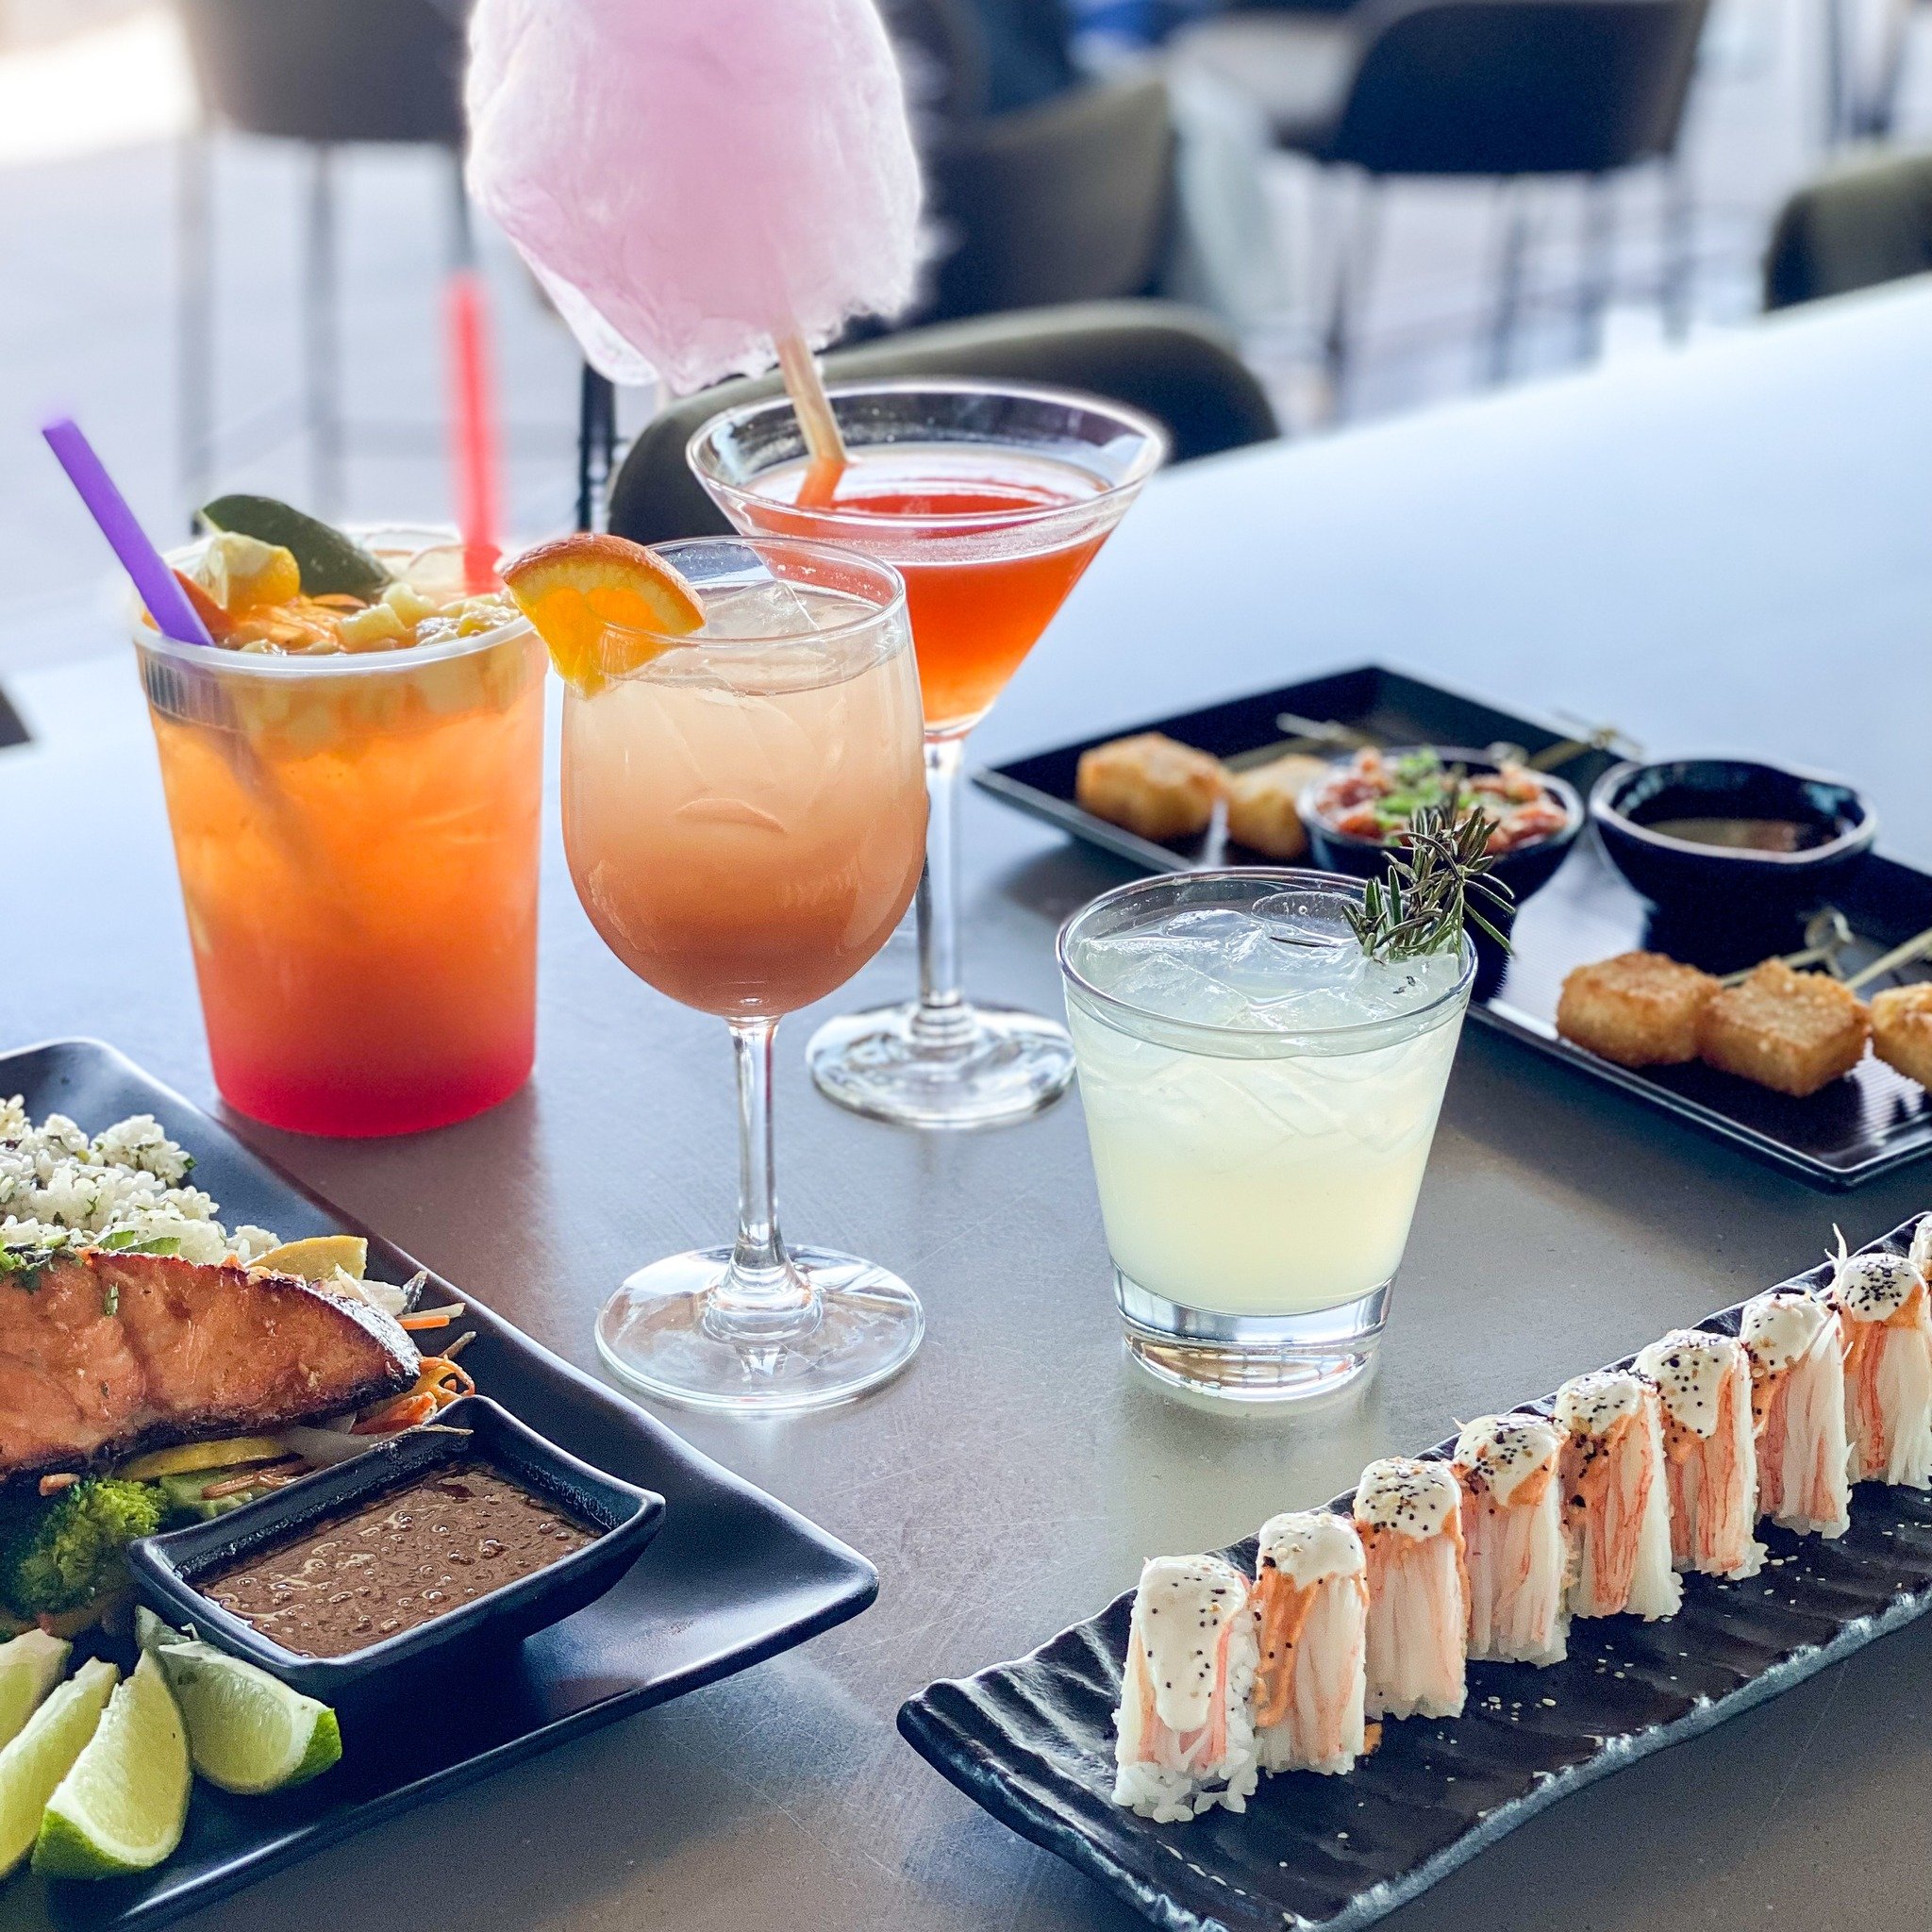 New itr drop 😋 for this week&rsquo;s specials. 

📸 here: 

🍹 32 oz rum punch mega pint 
🍹Love on the brain 
🍹Smoke on the water
🍹Hint of Summer (mocktail)
 🍽 Honey-Sriracha Salmon
🍣 Truffle Crab Roll
🍣 Crispy Rice Tuna Tartare

For more deta